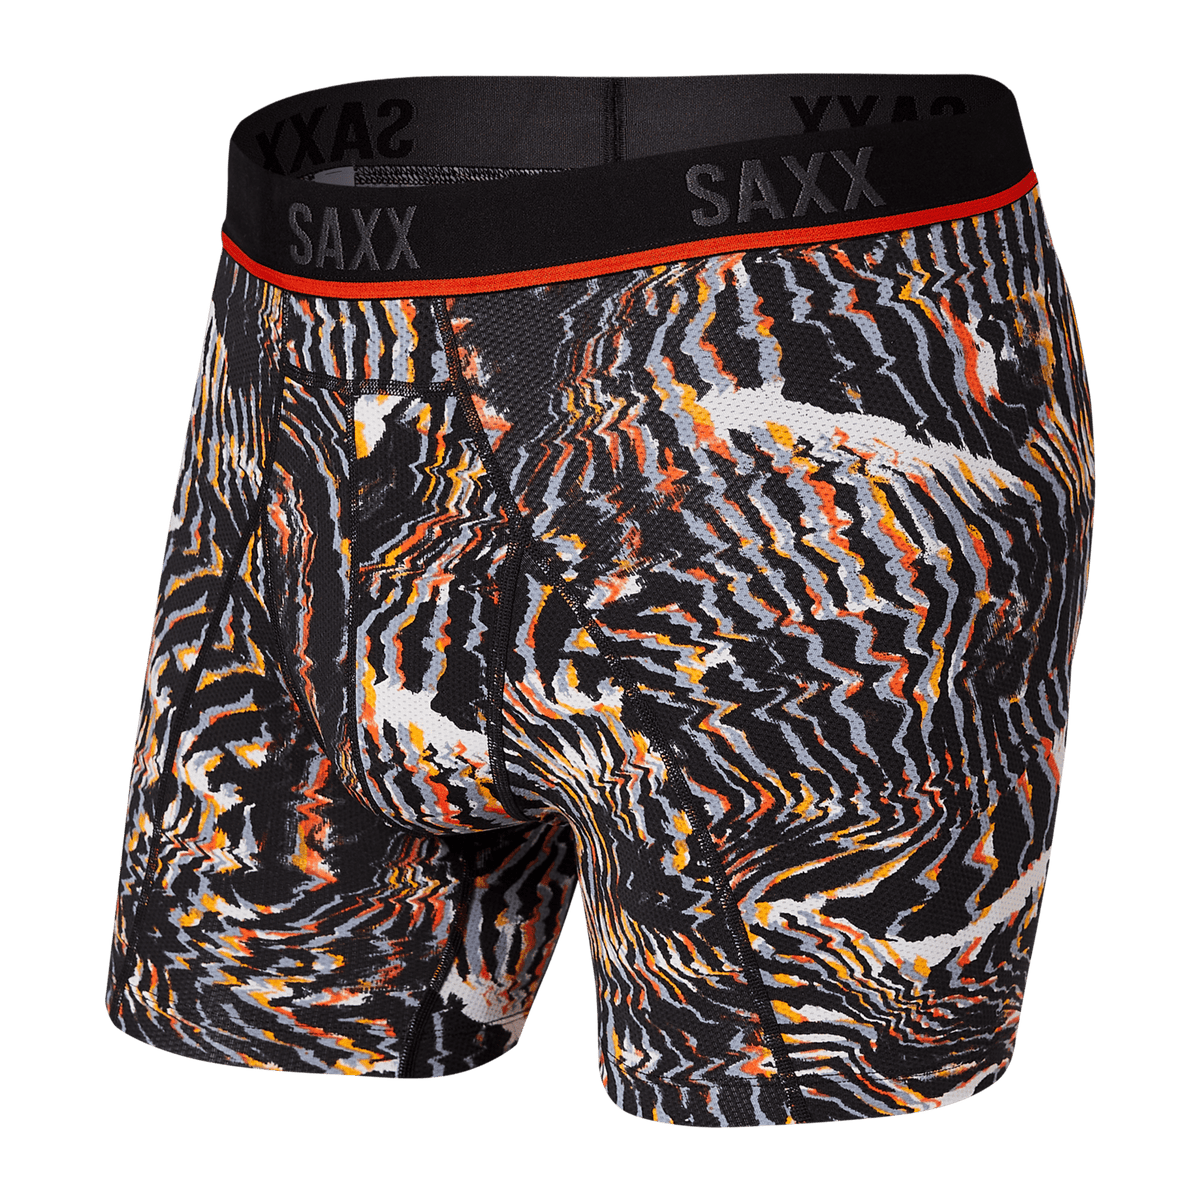 Saxx Kinetic HD Boxer Brief - SXBB32 - Multiple Styles